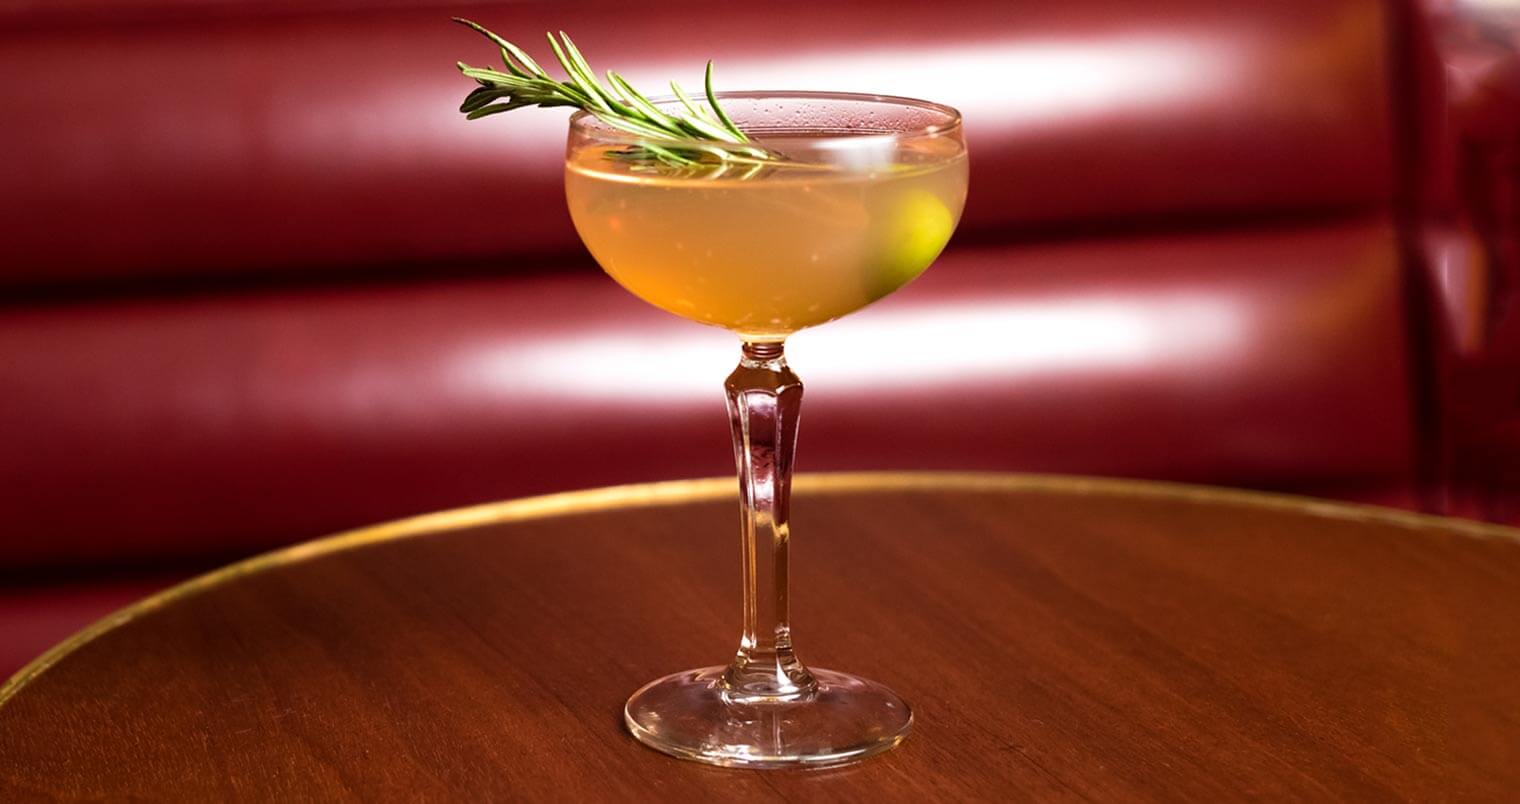 Into the Wild: Pine Cocktails for Winter